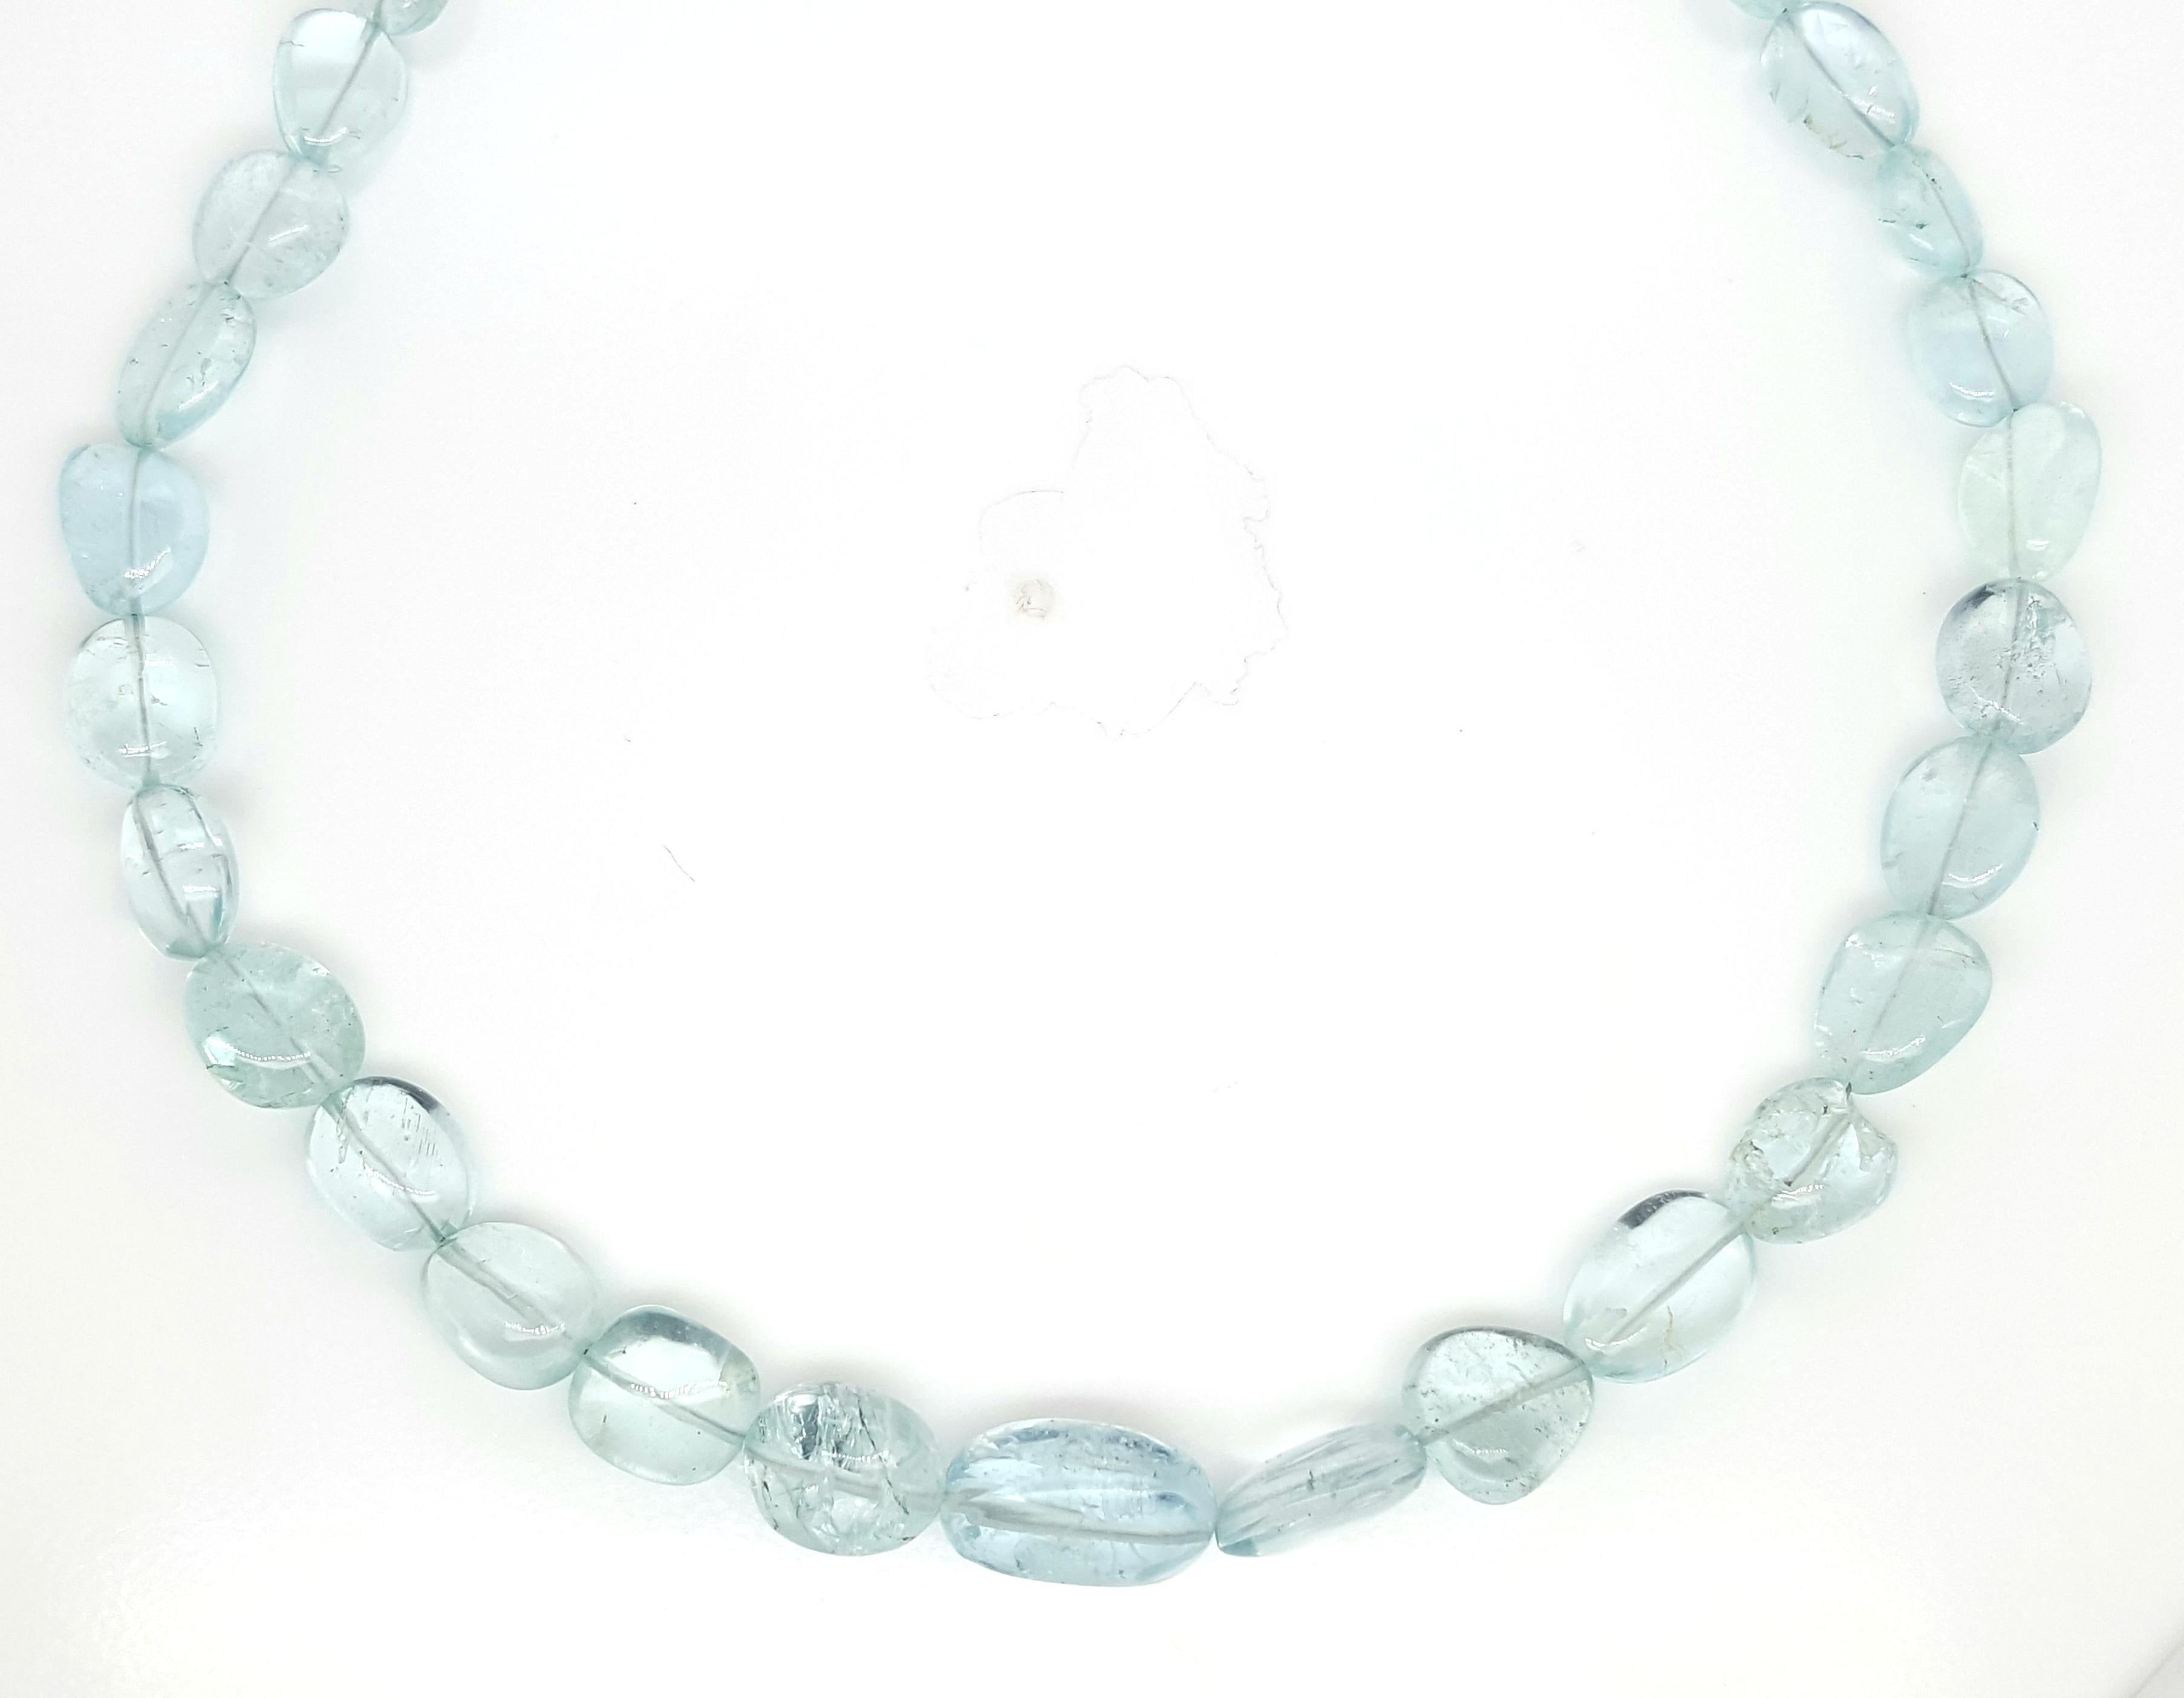  Aquamarine Nuggets Beaded Necklace is absolutely divine. The aquamarine beads range in size from 6.45 mm to 12.8 mm in diameter. Every bead in the necklace is natural aquamarine. The colors are very bright and lively that  blend beautifully